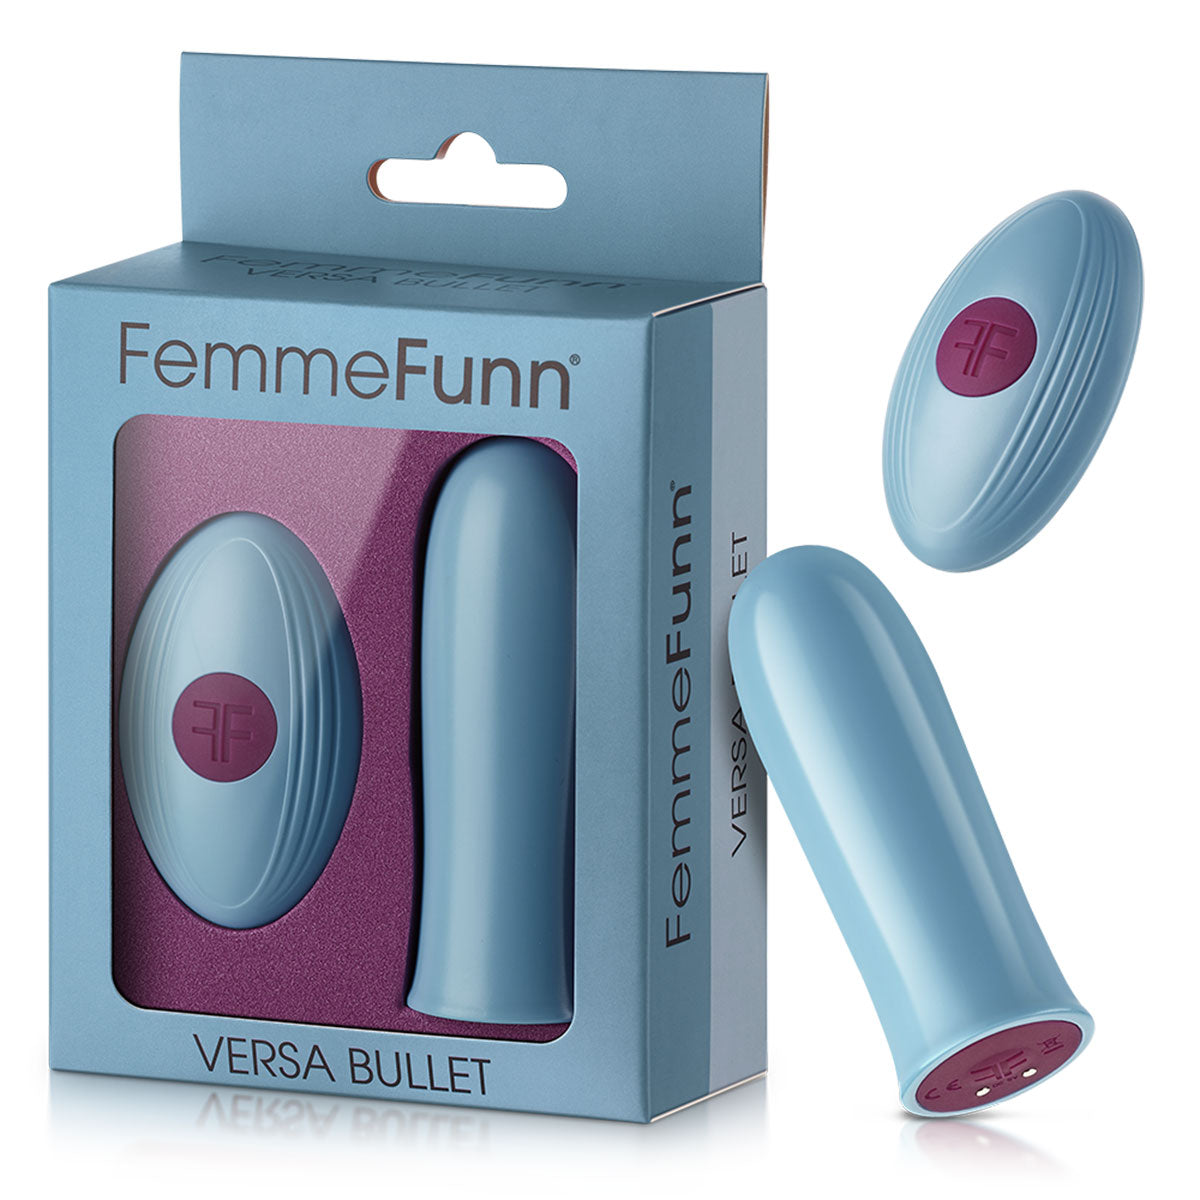 Femme Funn Versa Bullet and Remote